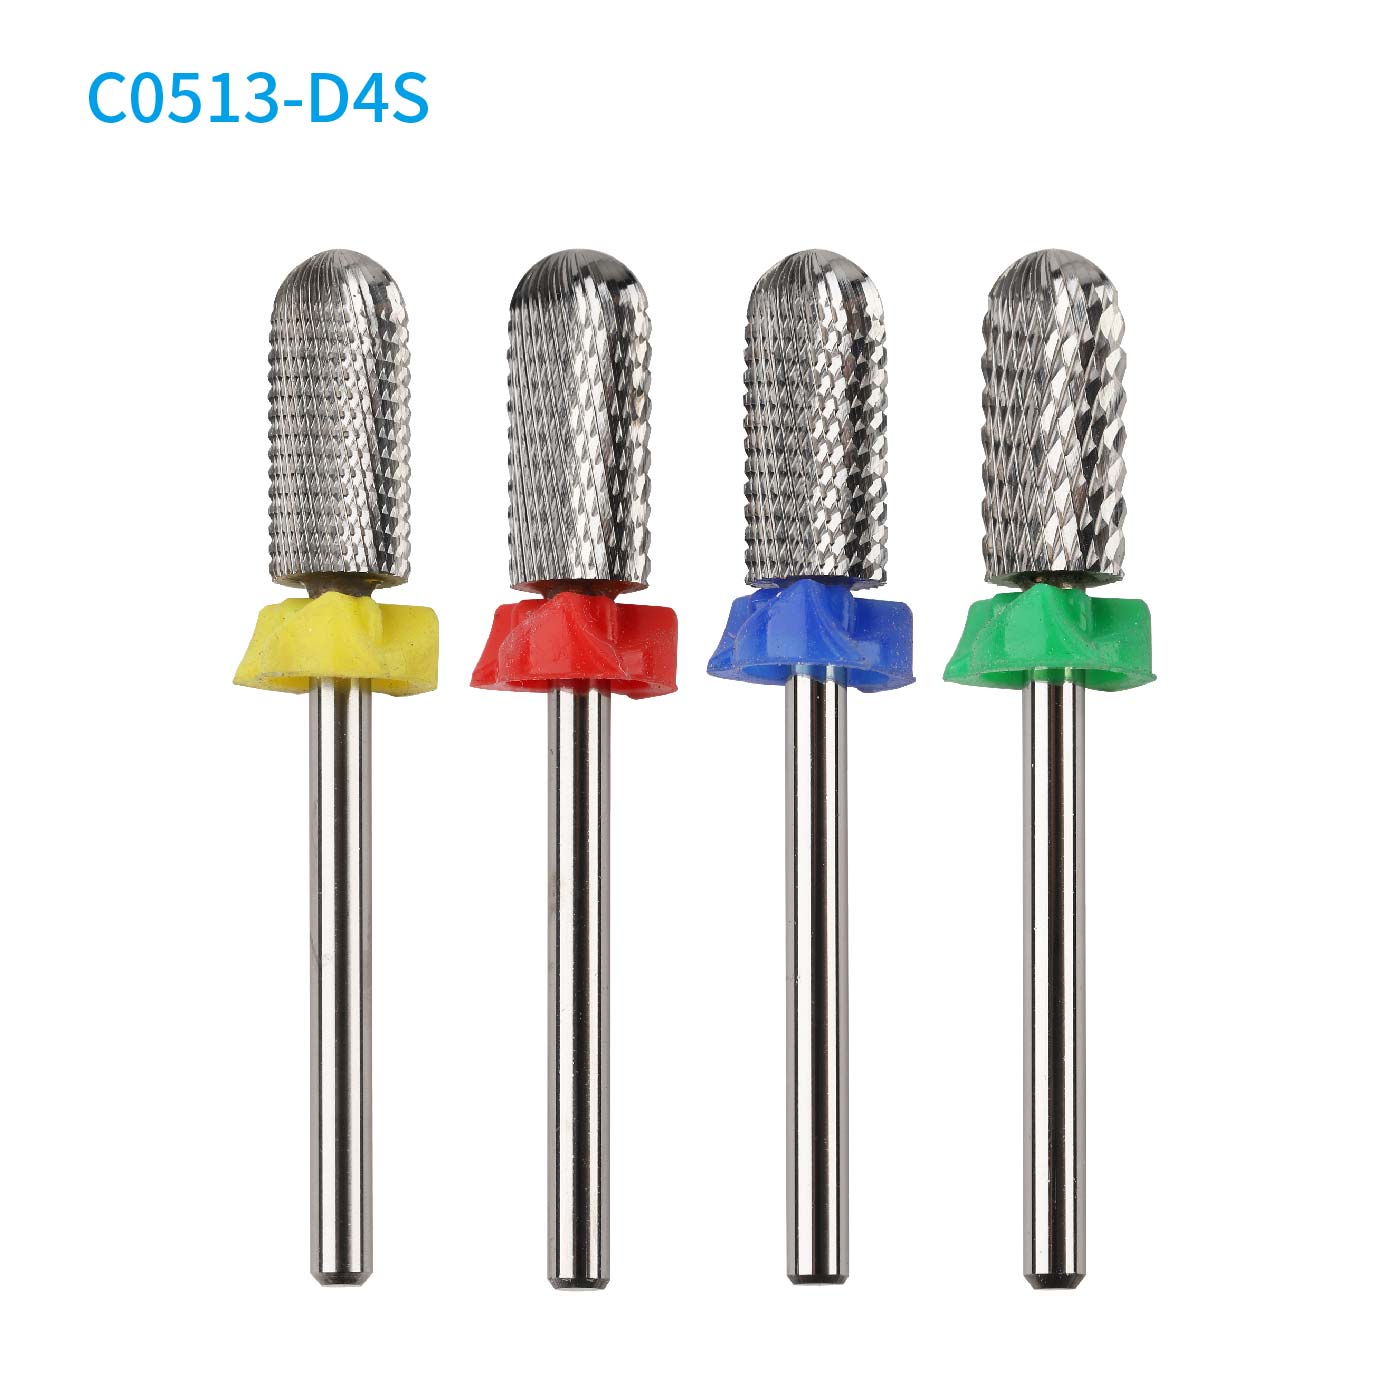 C0513-D4S Dust Free Barrel Round Top Carbide Nail Milling Cutter